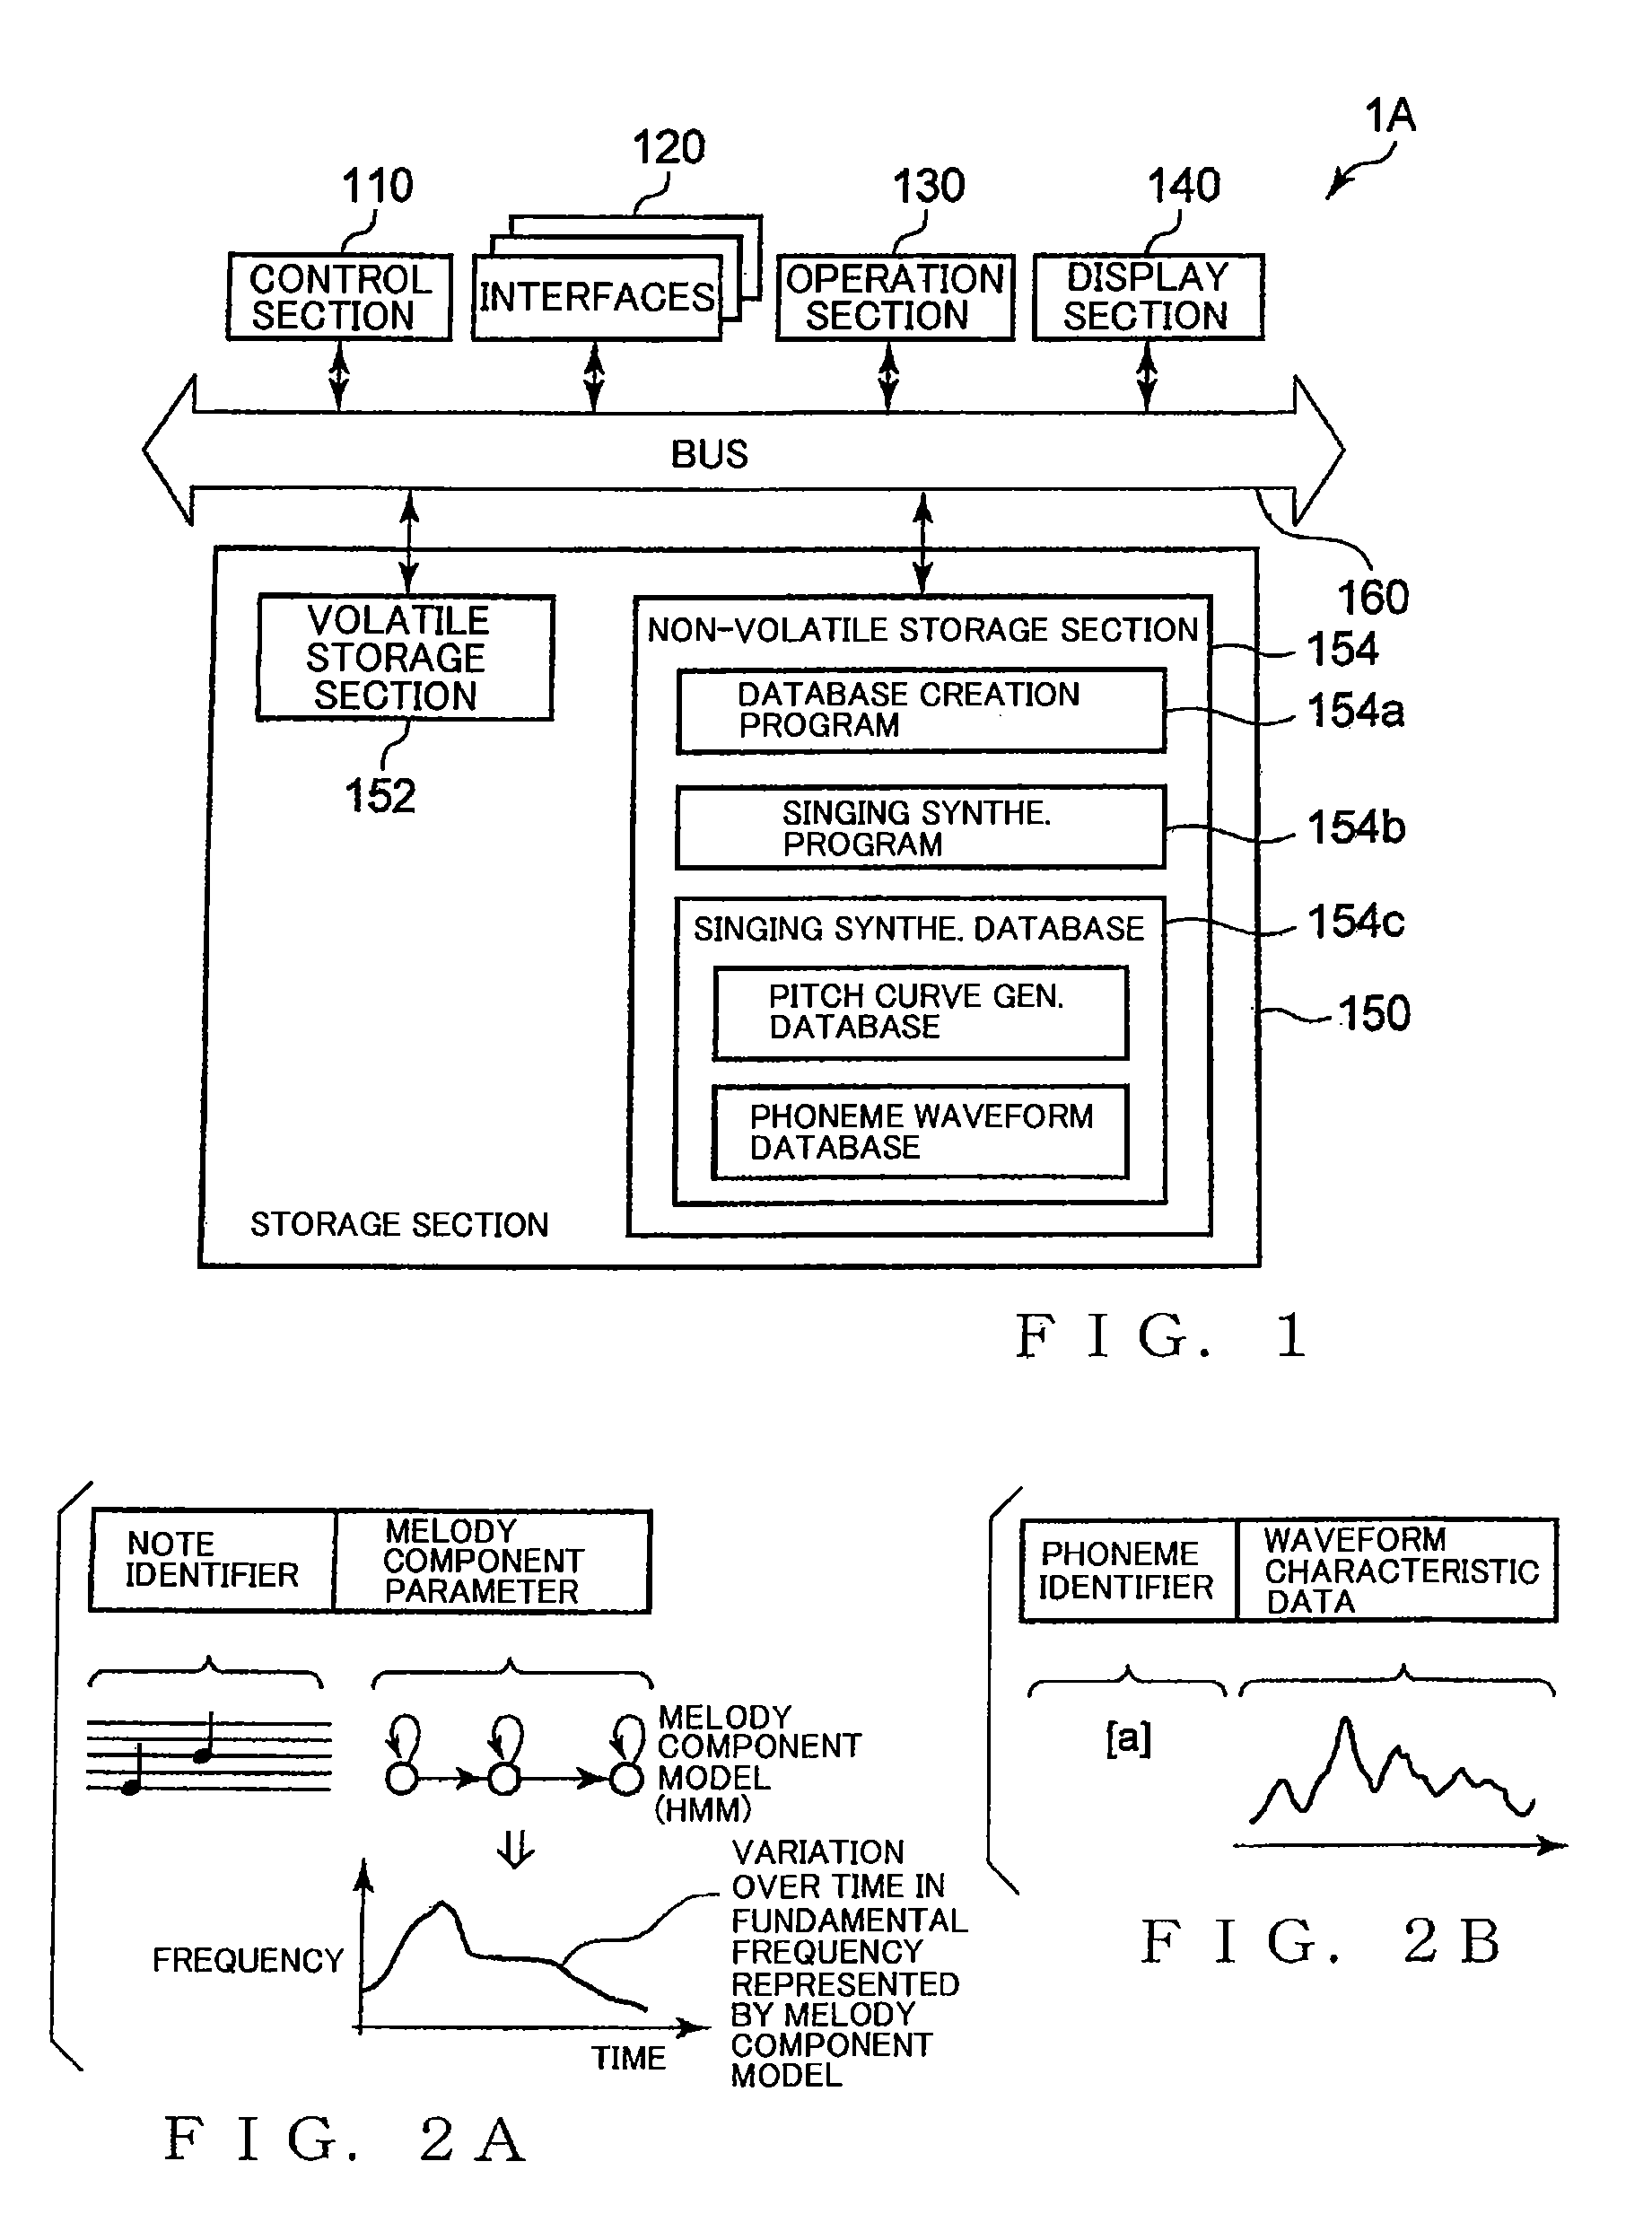 Apparatus and method for creating singing synthesizing database, and pitch curve generation apparatus and method